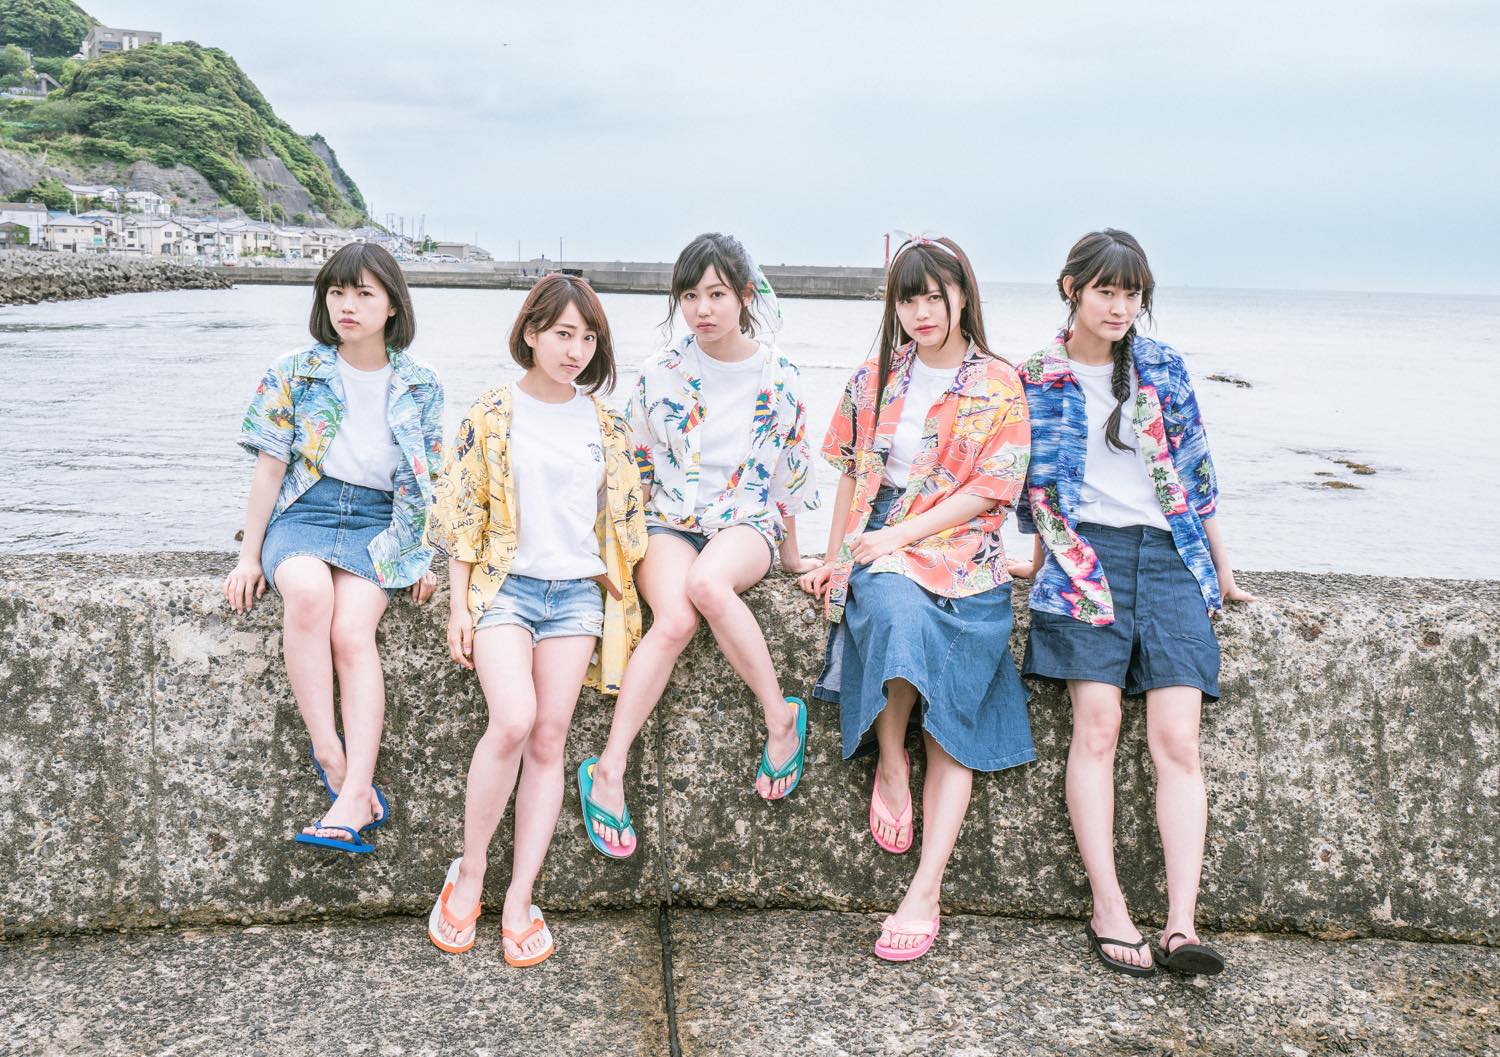 lyrical school Turns Up The Heat With the MV for “Natsuyasumi no BABY”!